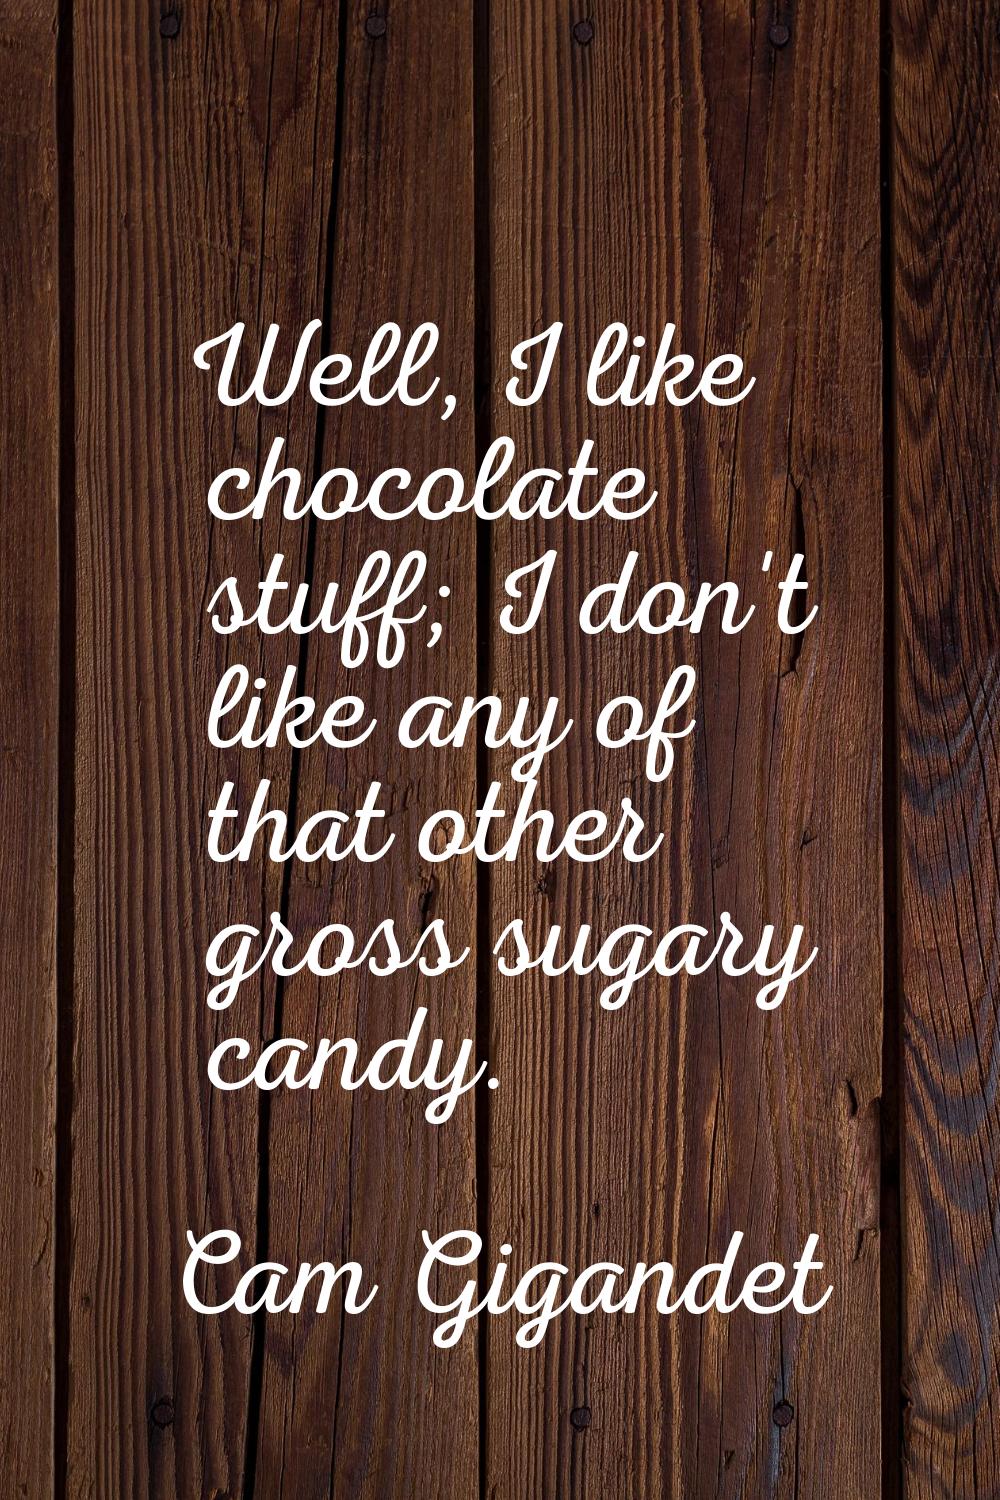 Well, I like chocolate stuff; I don't like any of that other gross sugary candy.